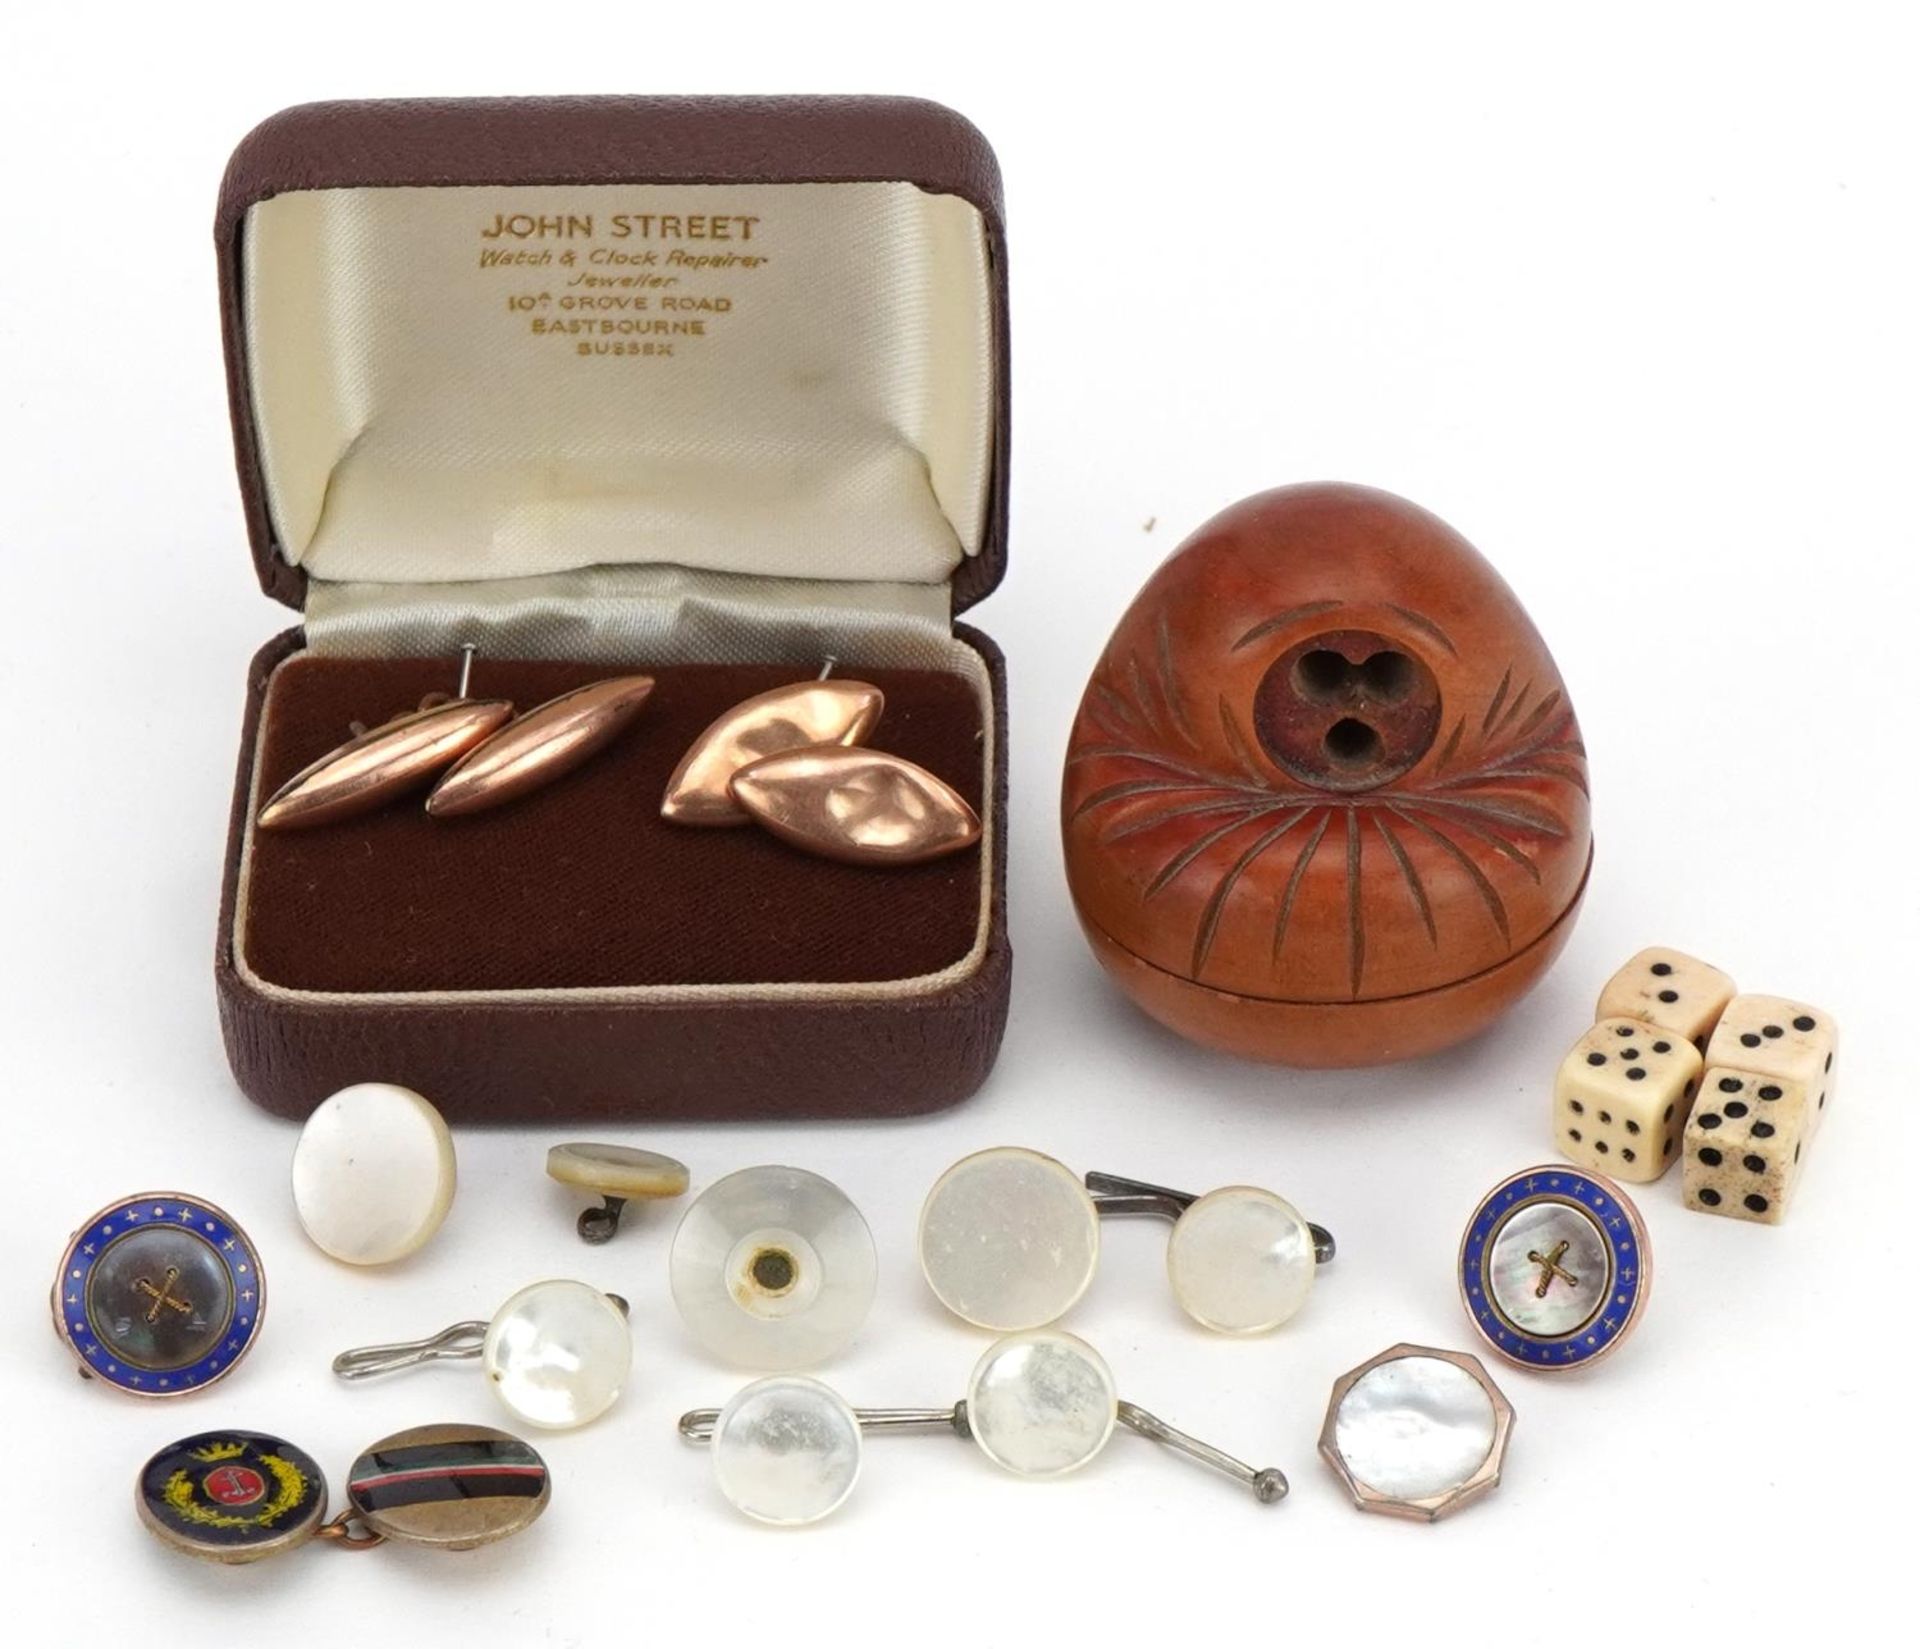 Japanese Kobe doll with four bone dice and various cufflinks including one 9ct gold and mother of